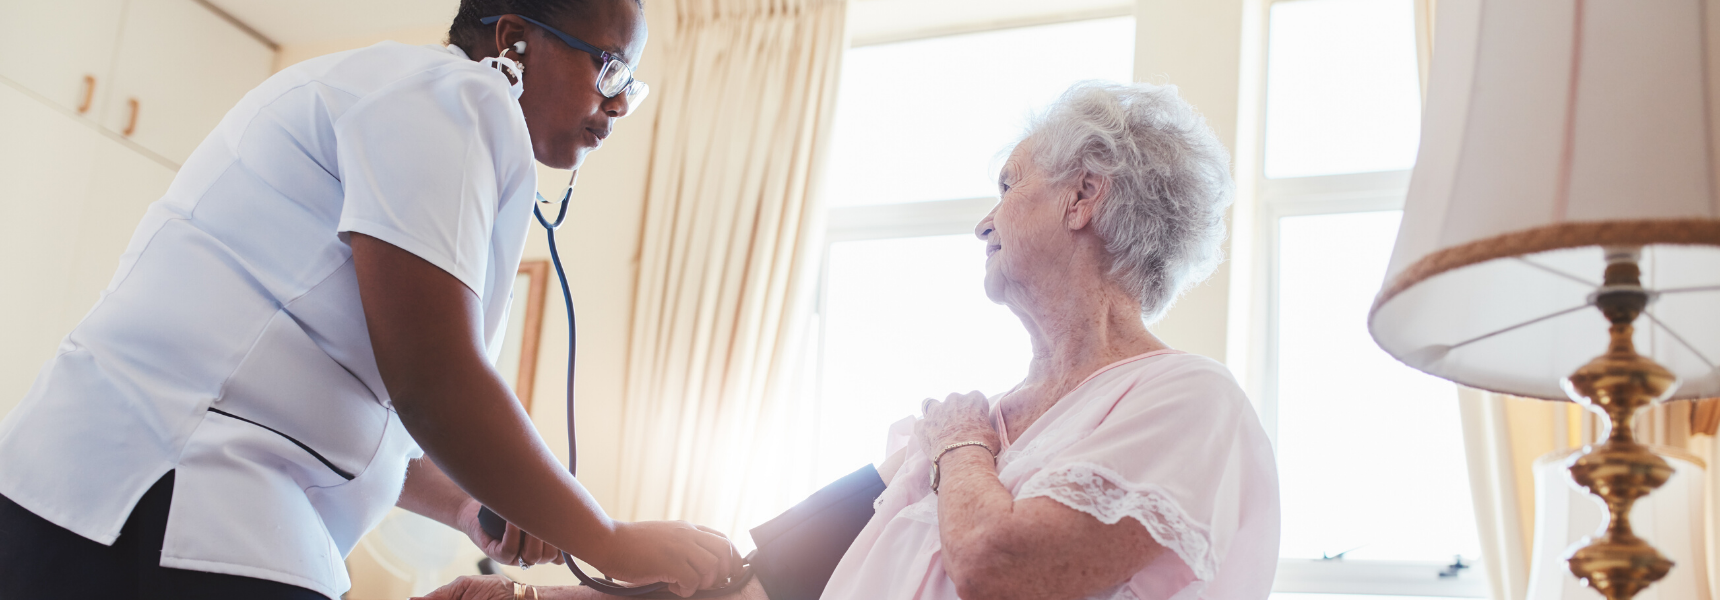 Nurse taking the pulse of an older woman